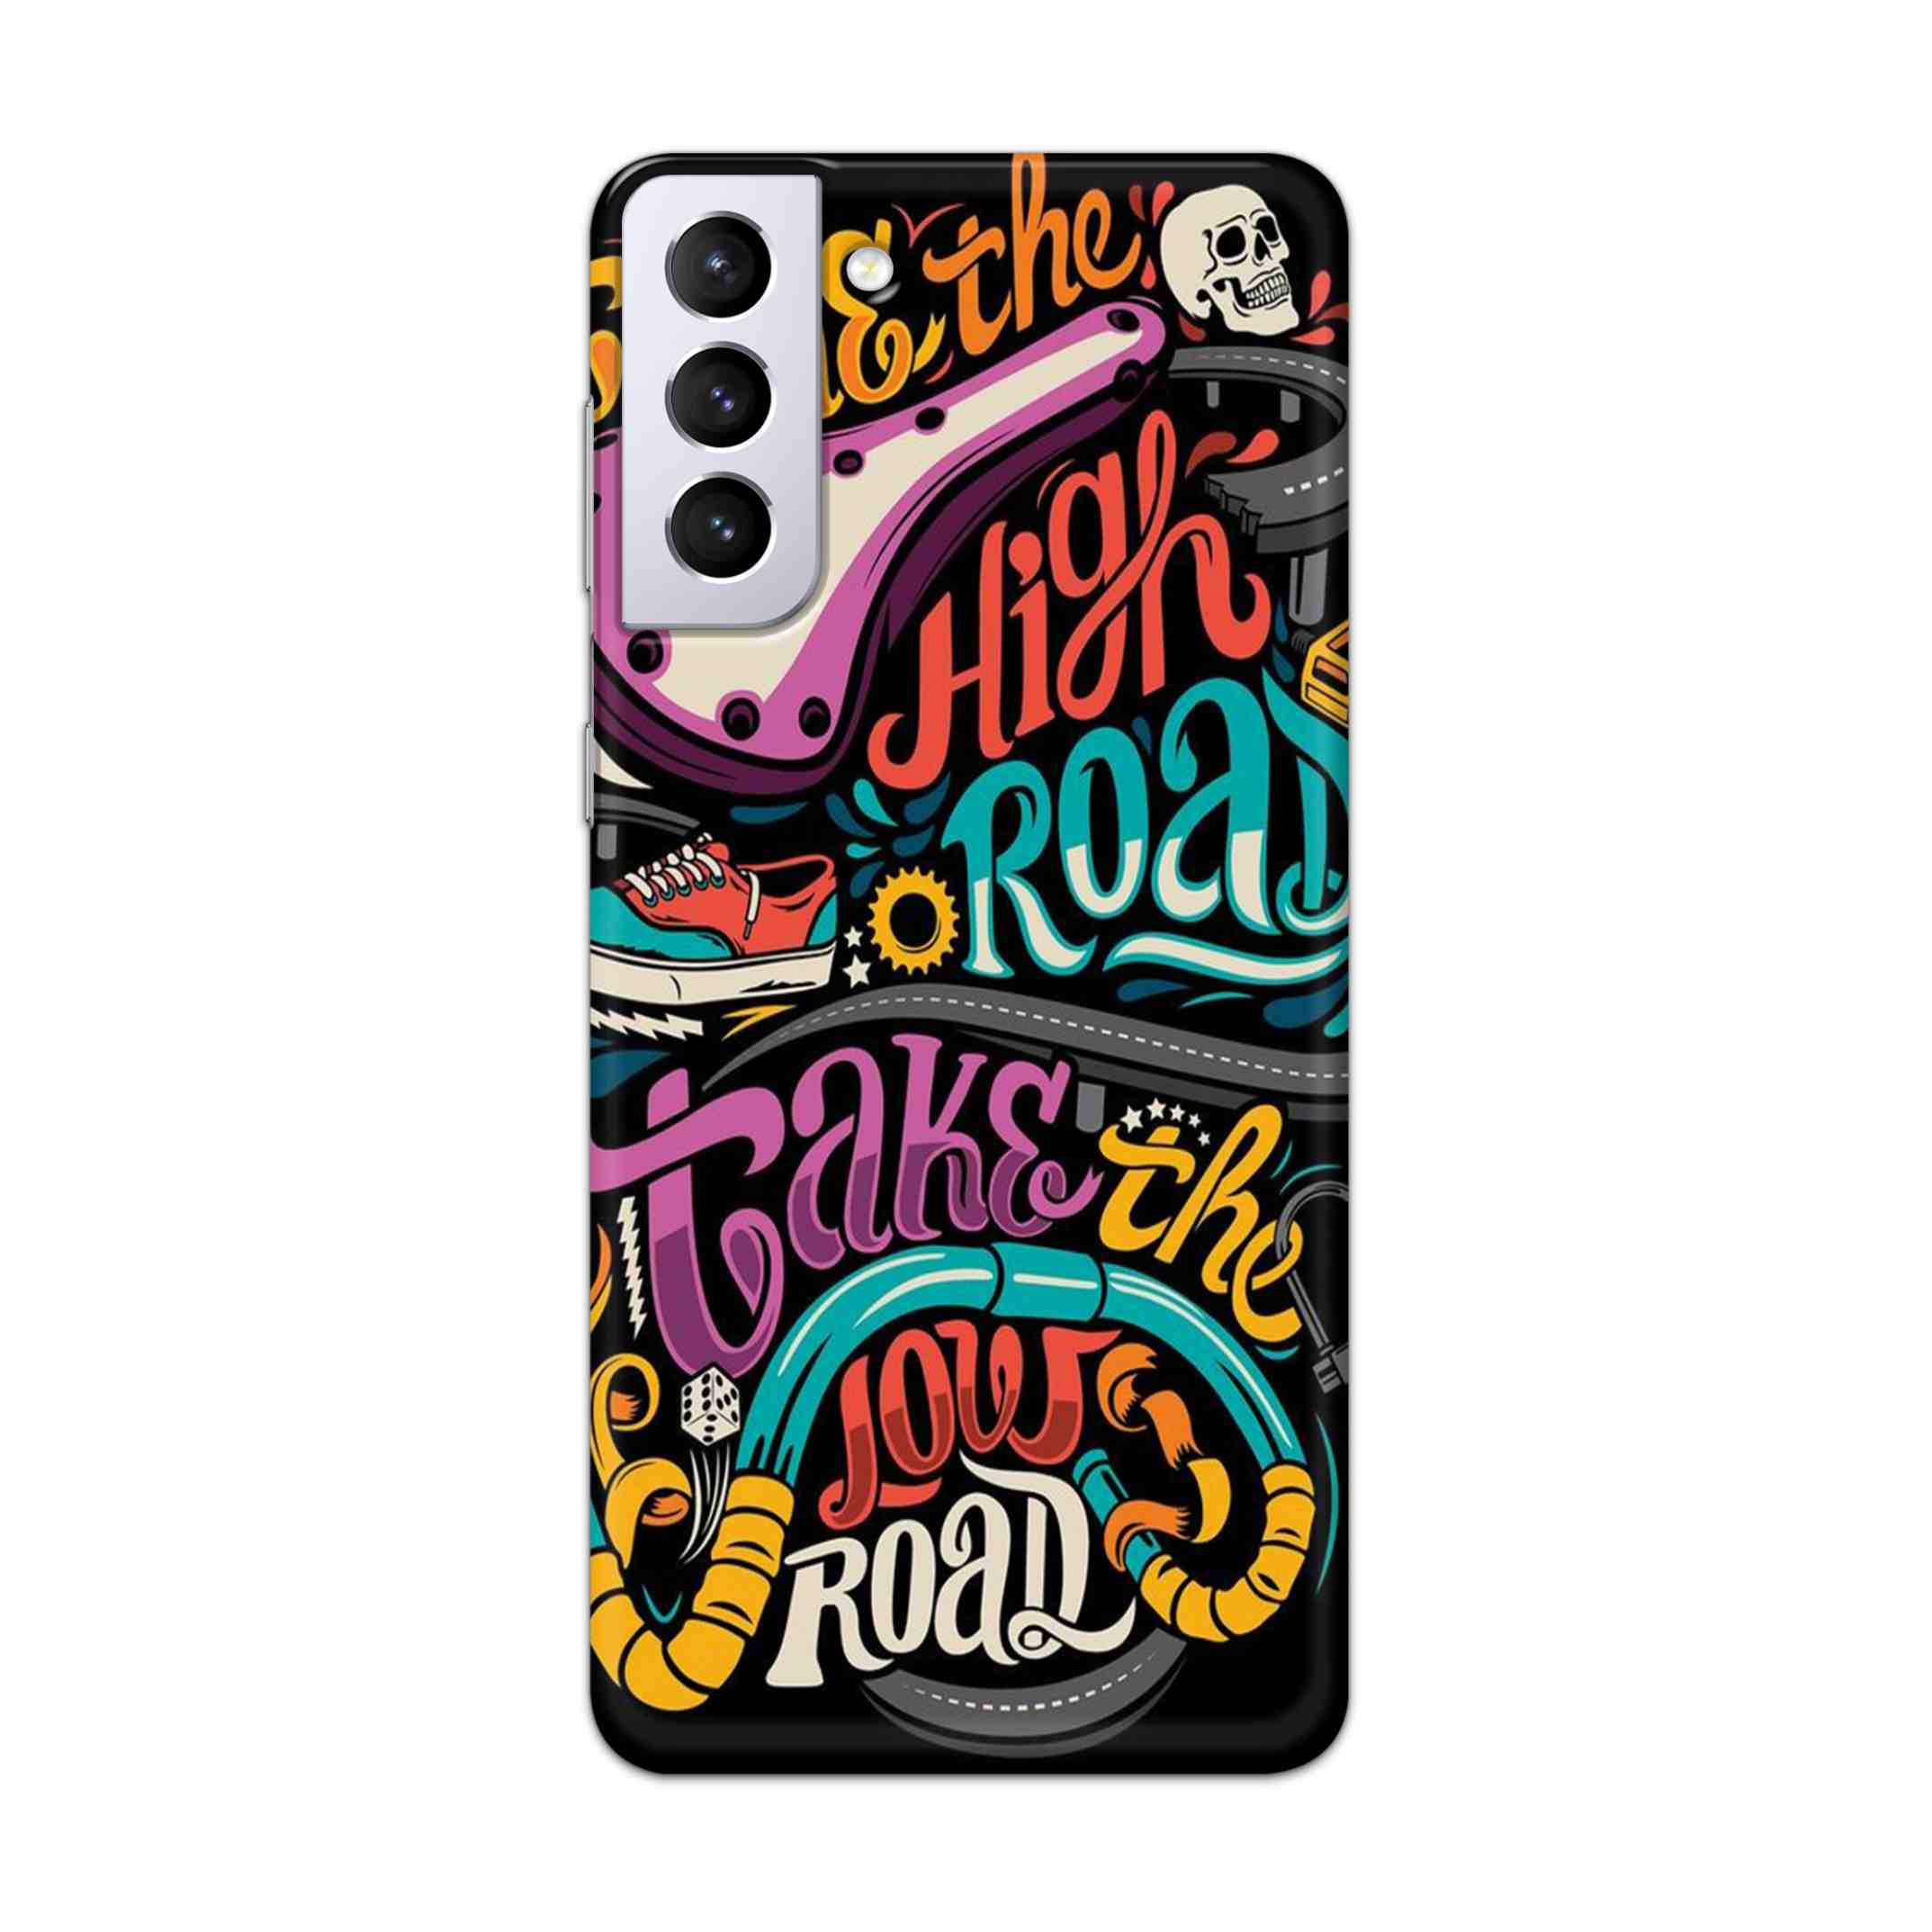 Buy Take The High Road Hard Back Mobile Phone Case Cover For Samsung Galaxy S21 Plus Online